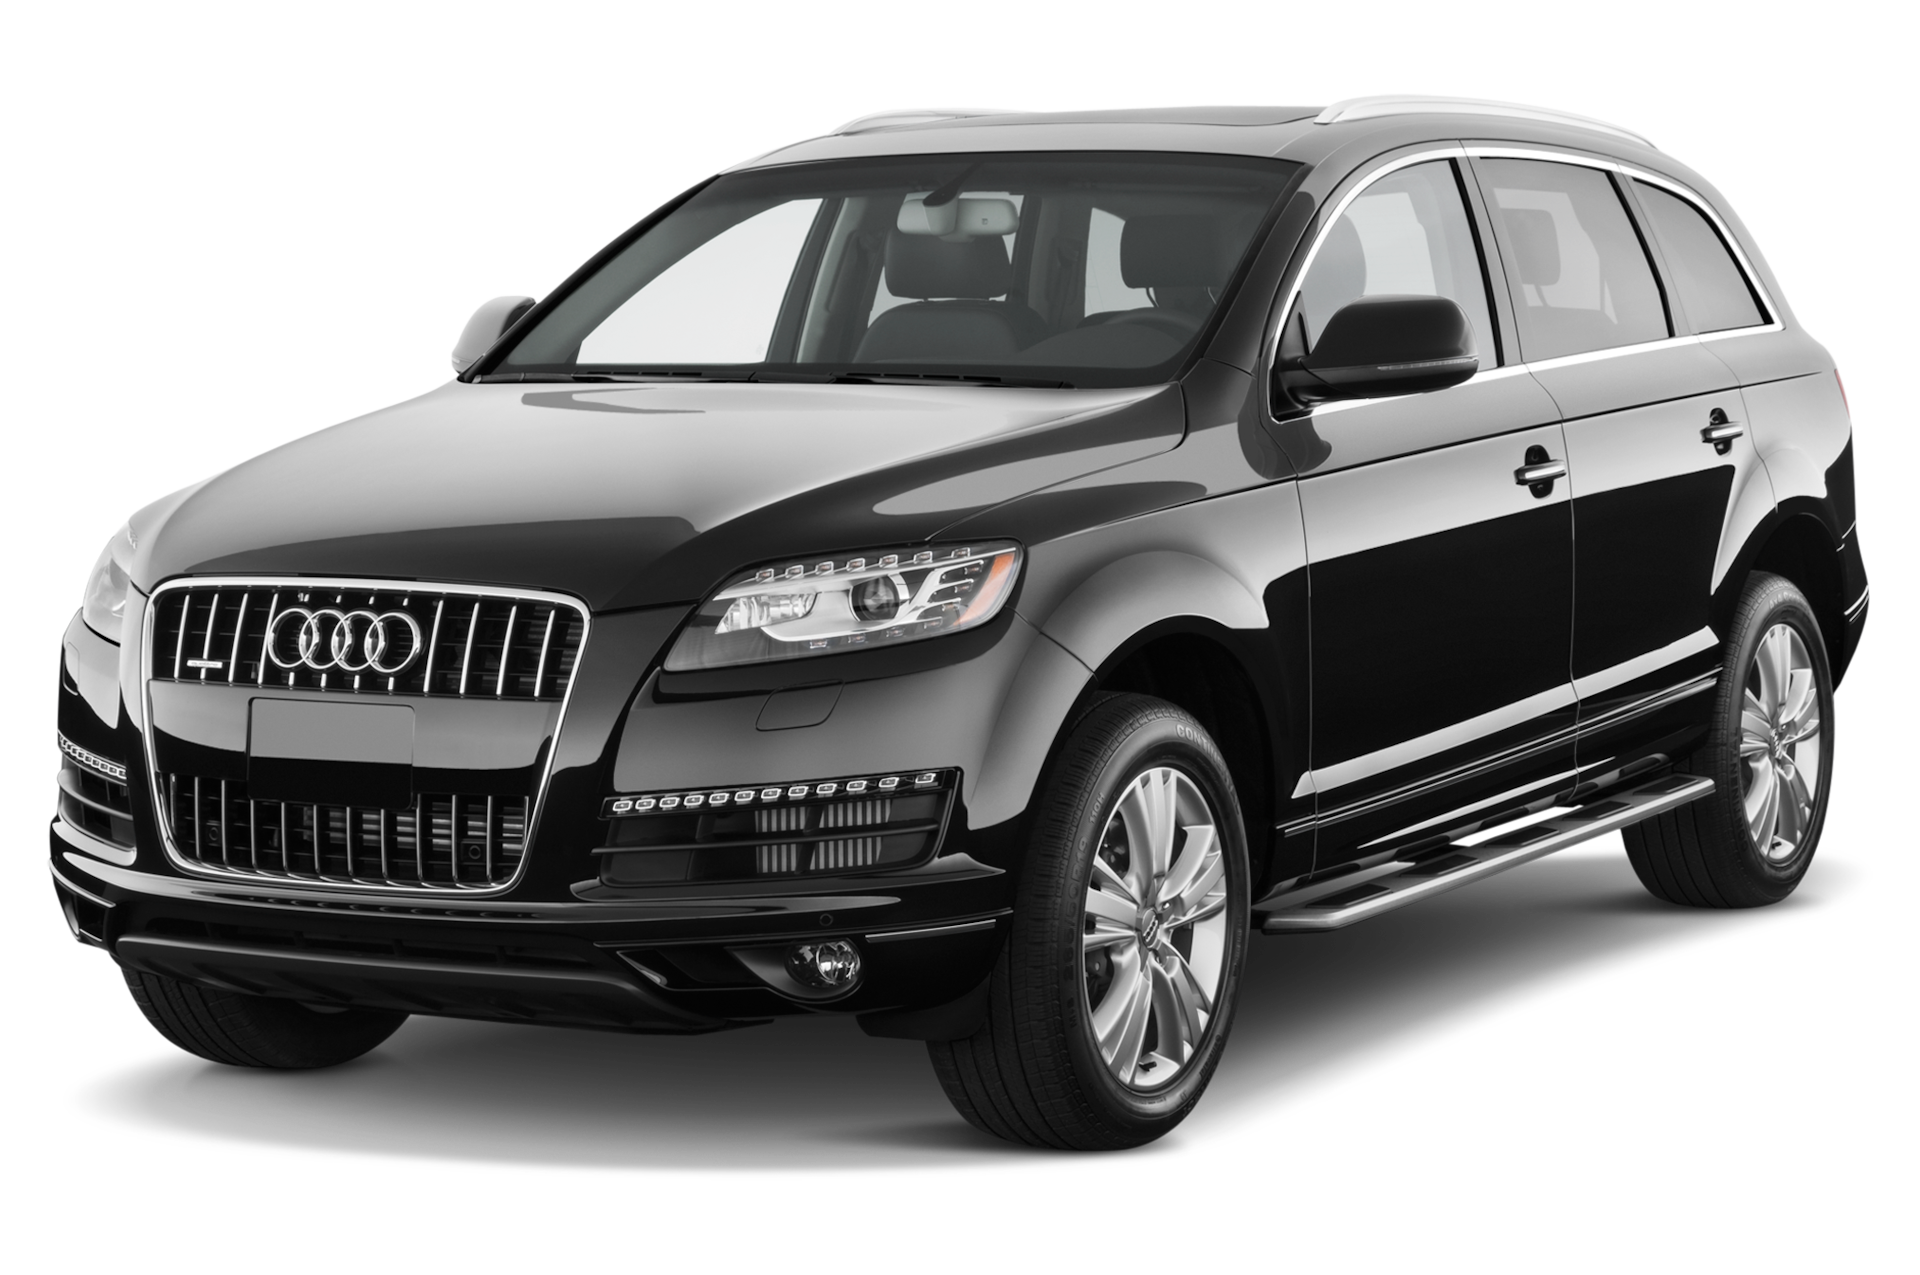 2012 Audi Q7 Prices, Reviews, and Photos - MotorTrend